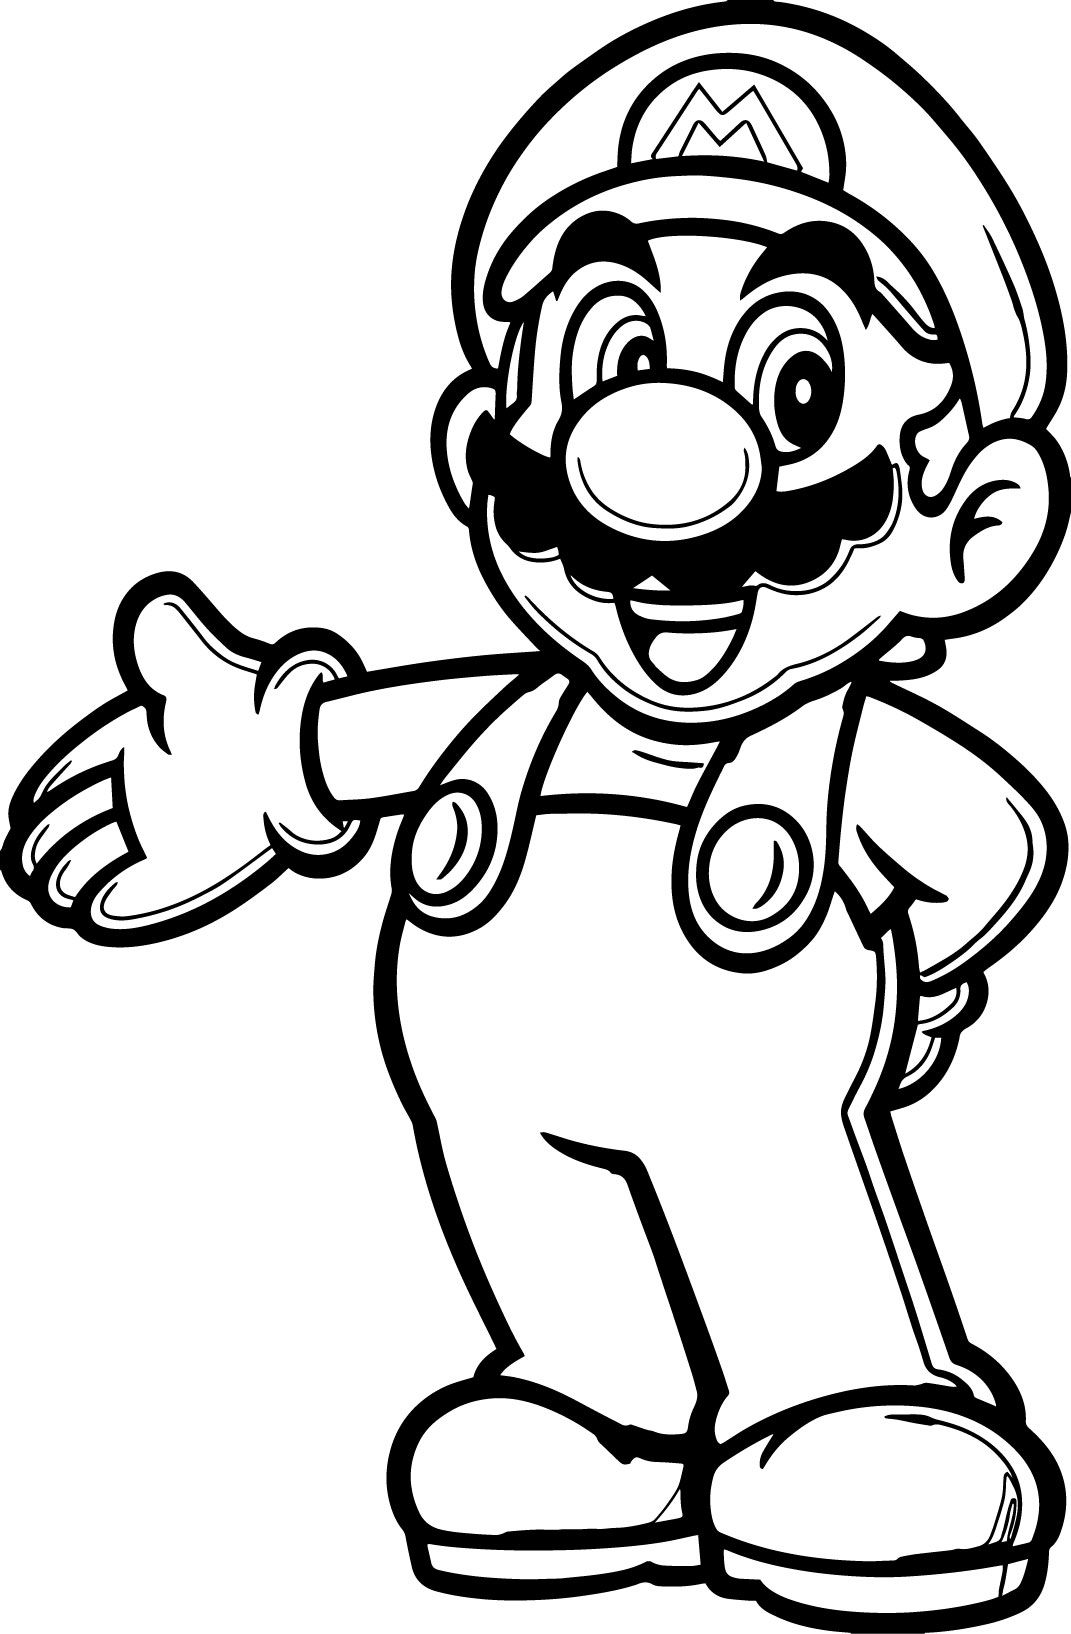 mario characters coloring pages mario kart characters coloring pages coloring home characters coloring mario pages 